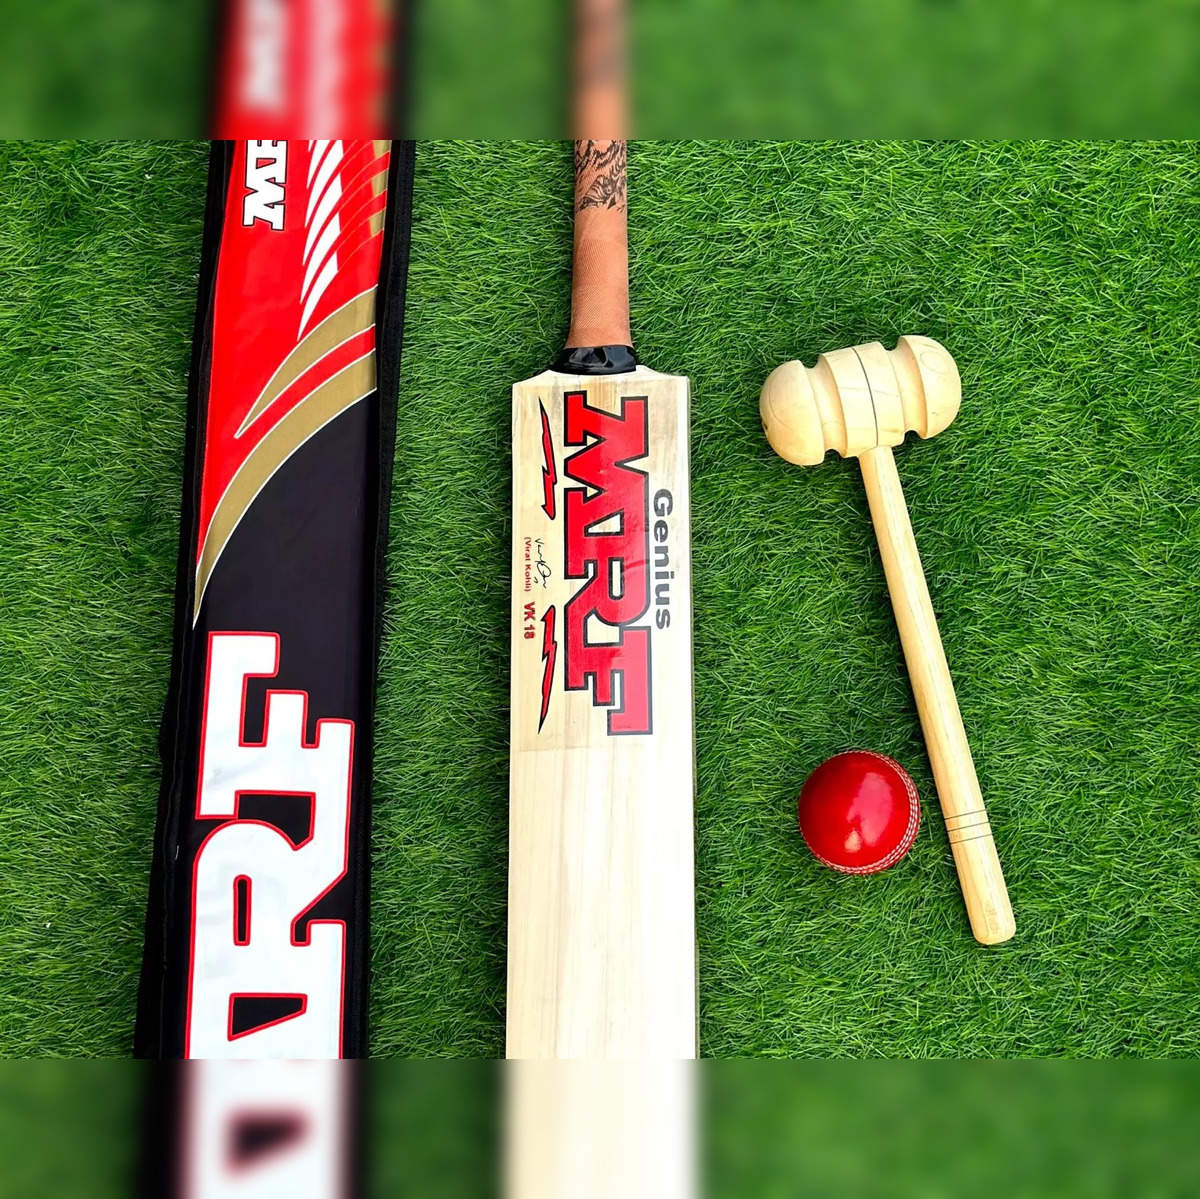 Cricket Accessories in India  Cricket Accessories Manufacturers